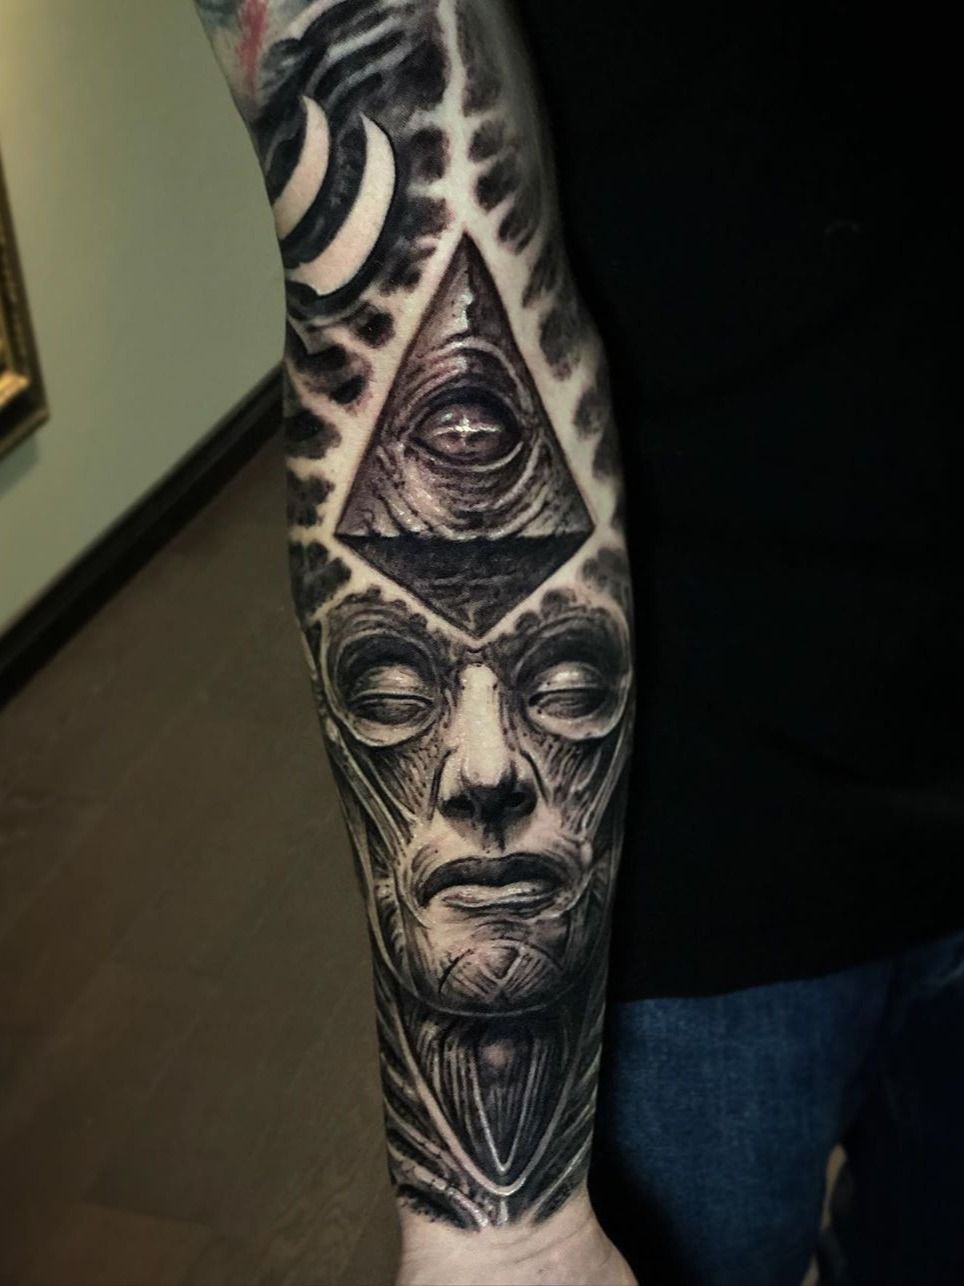 The All Seeing Eye Tattoo Meaning And 105+ Designs To Open Your Eyes